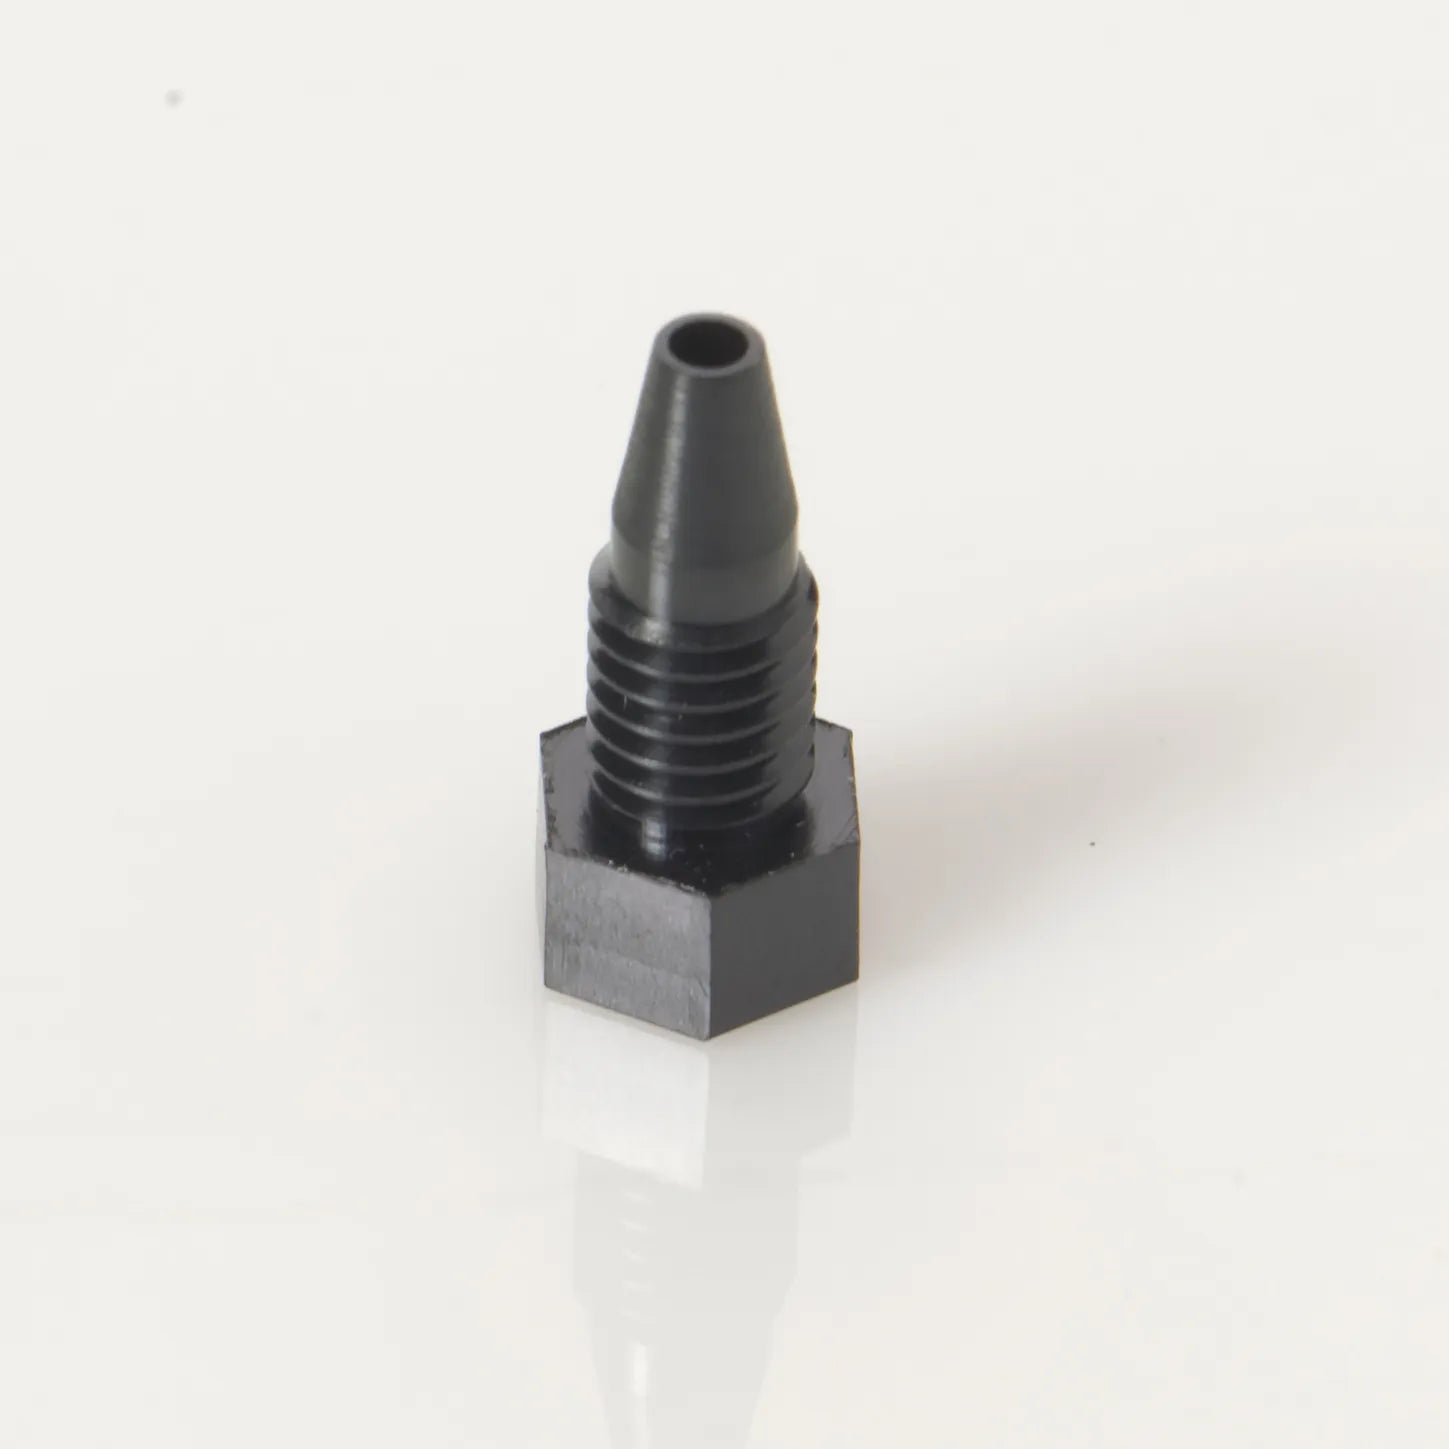 1/16" Short Hex PEEK™ Fitting, Comparable to Sciex # 5053804, Old OEM # 027471